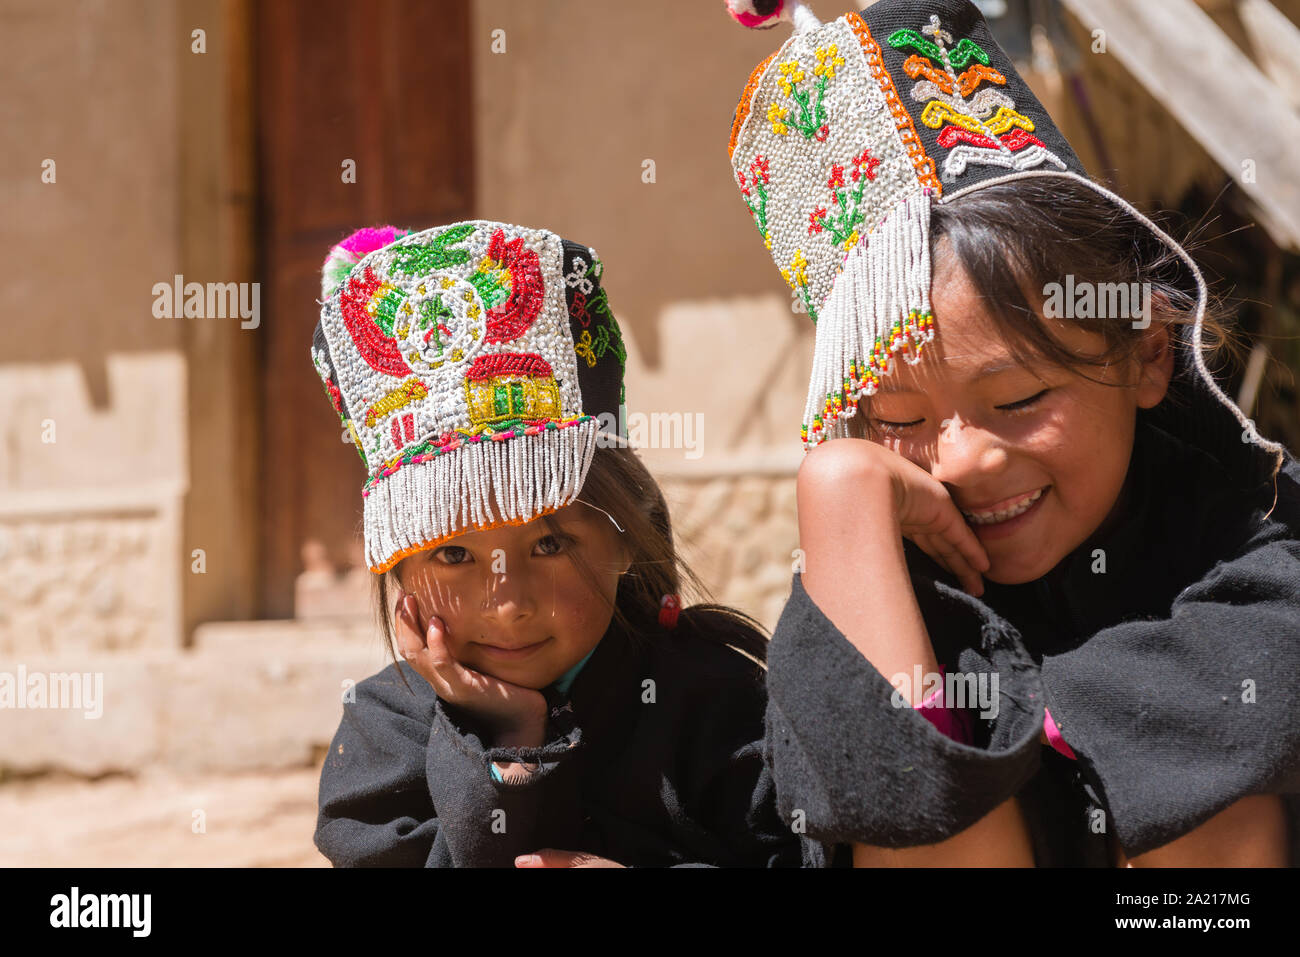 Two young girls, aged 4 to 6 at a touristic event in the indigenous village of Puka Puka near Tarabuco, Quechuan people, Sucre, Bolivia, Latin America Stock Photo